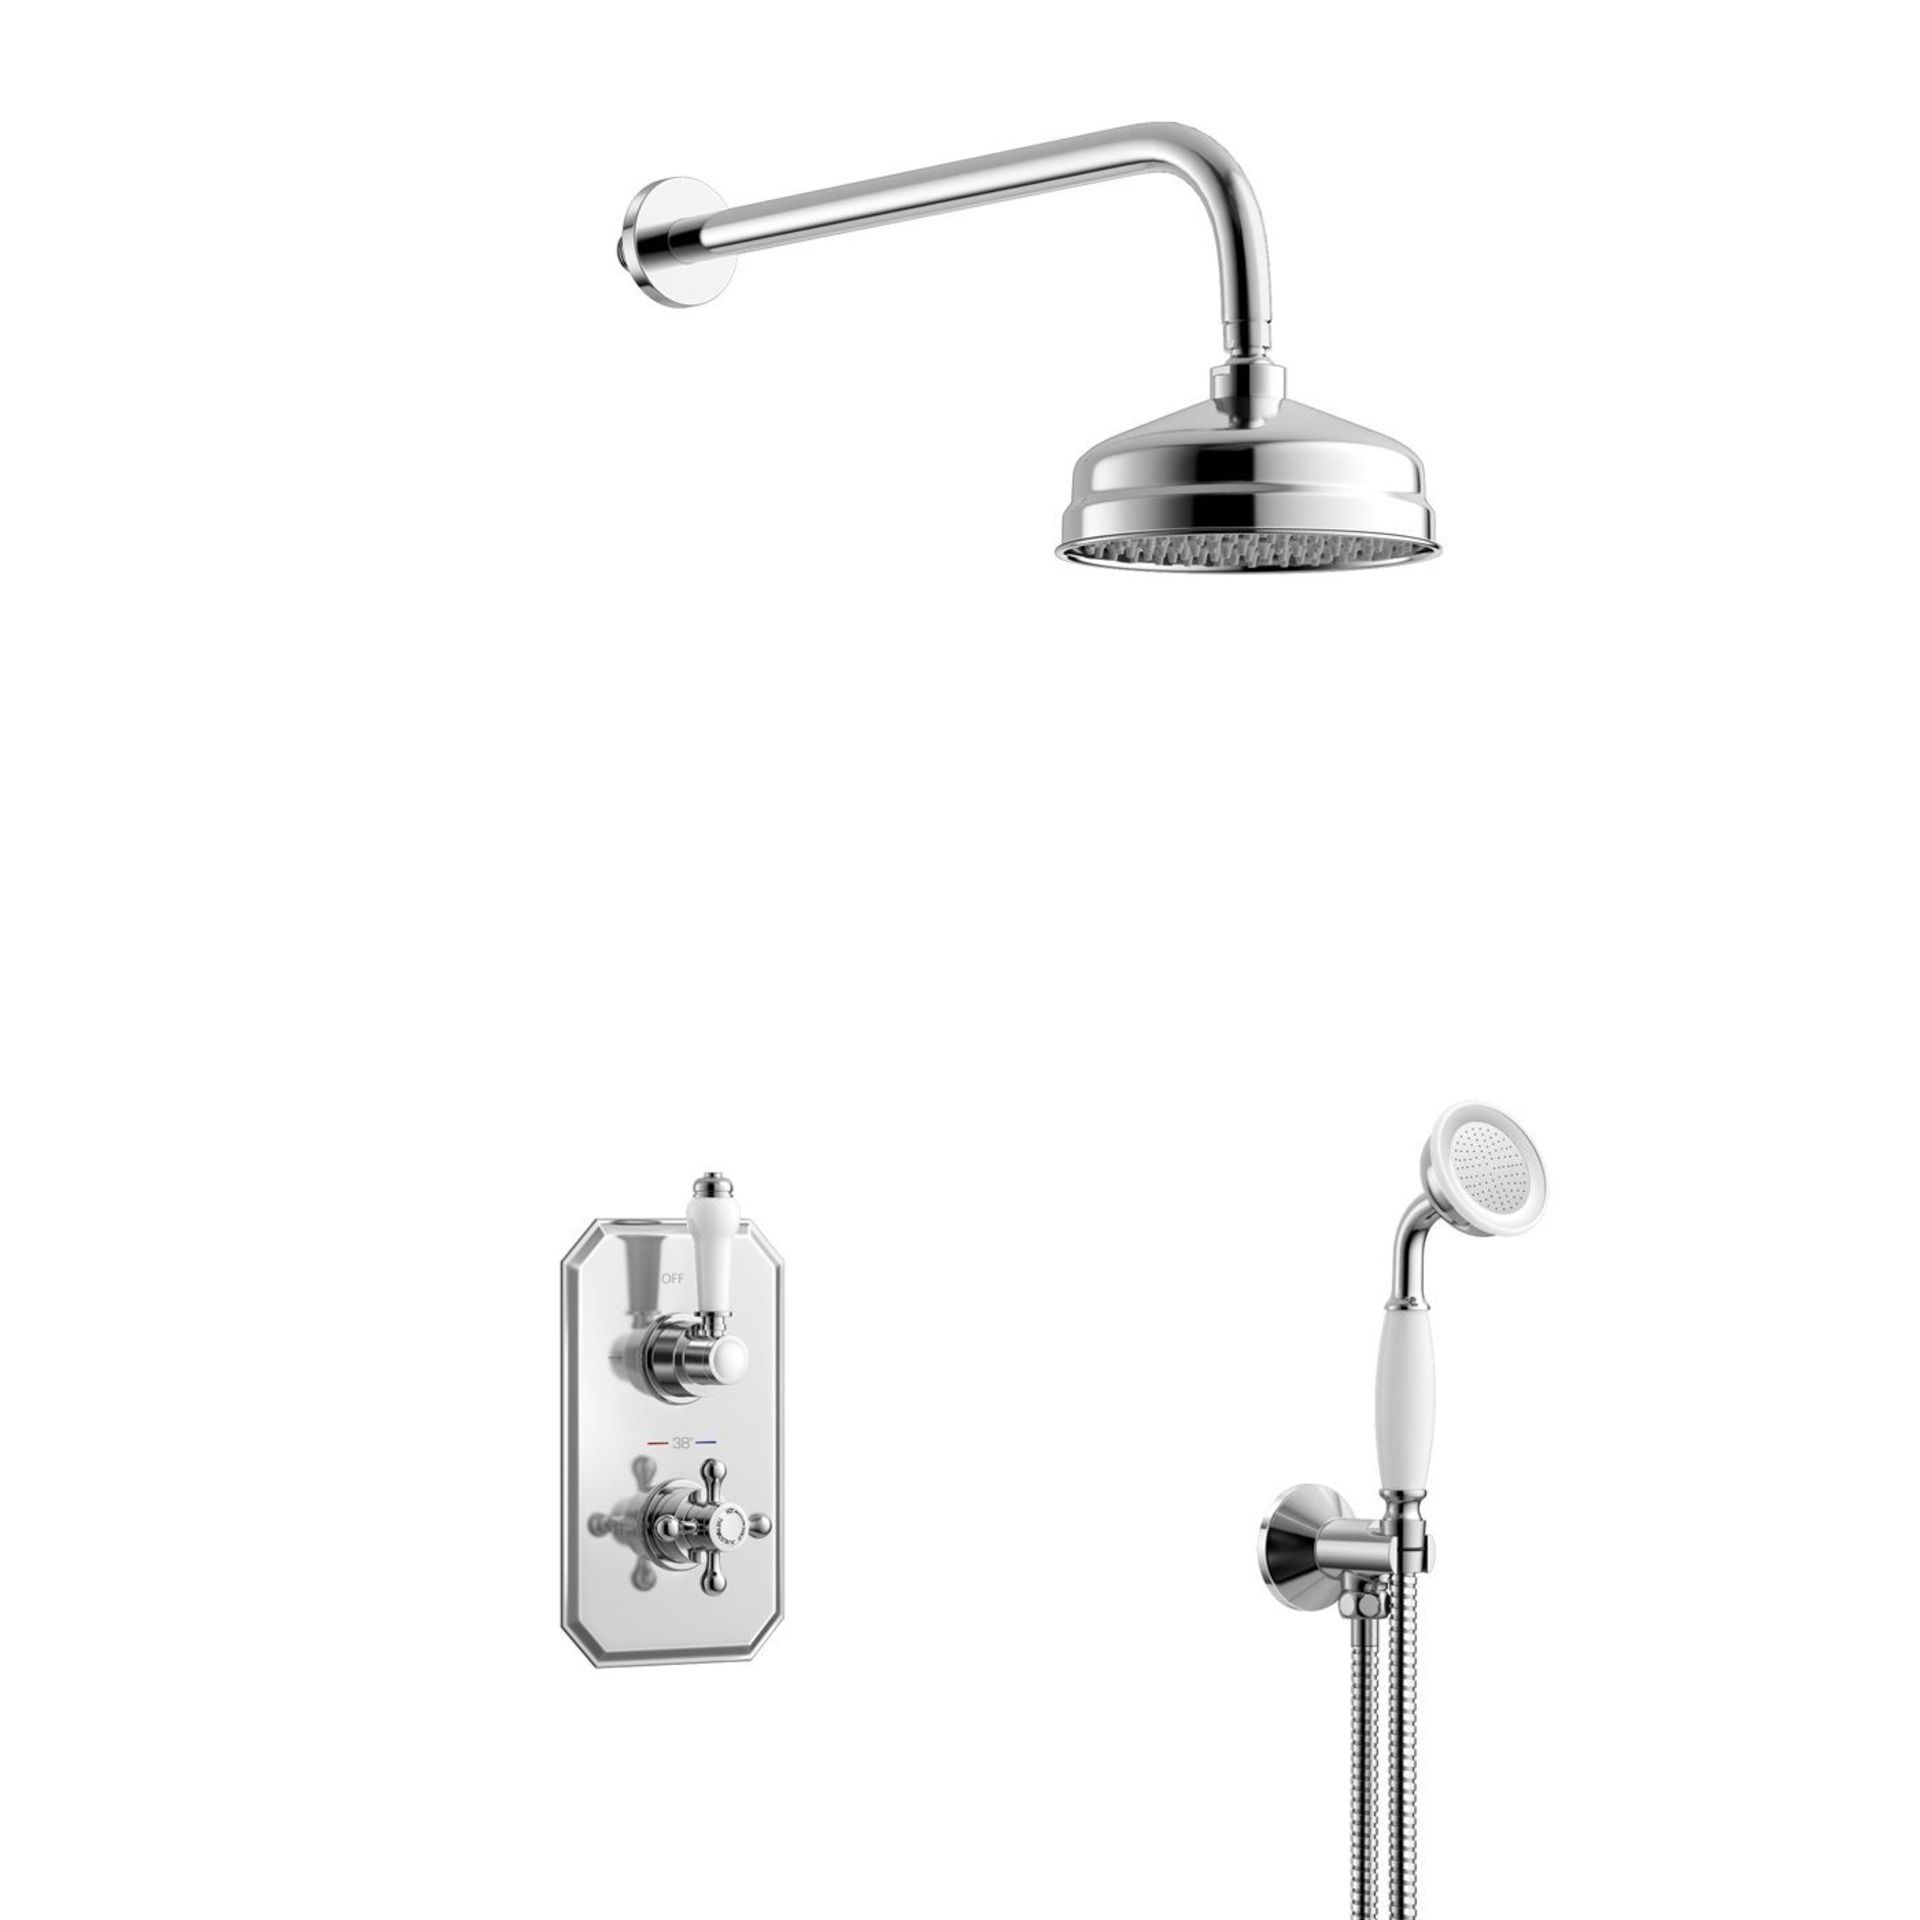 New & Boxed 150mm Traditional Stainless Steel Wall Mounted Head, Rail Kit. RRP £511.99. - Image 2 of 3